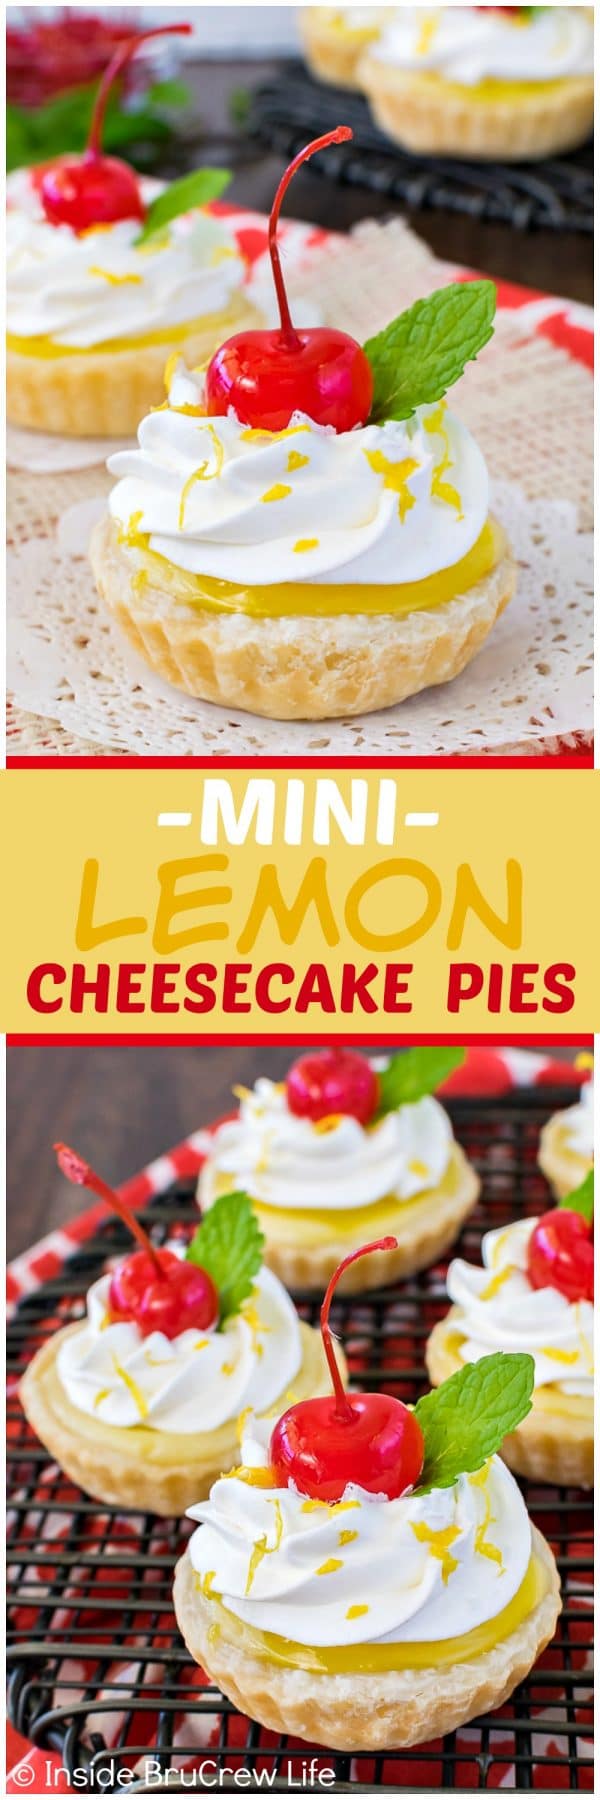 Mini Lemon Cheesecake Pies - sweet little hand held pies filled with a cheesecake and lemon pie filling swirl. Great dessert recipe for spring parties!